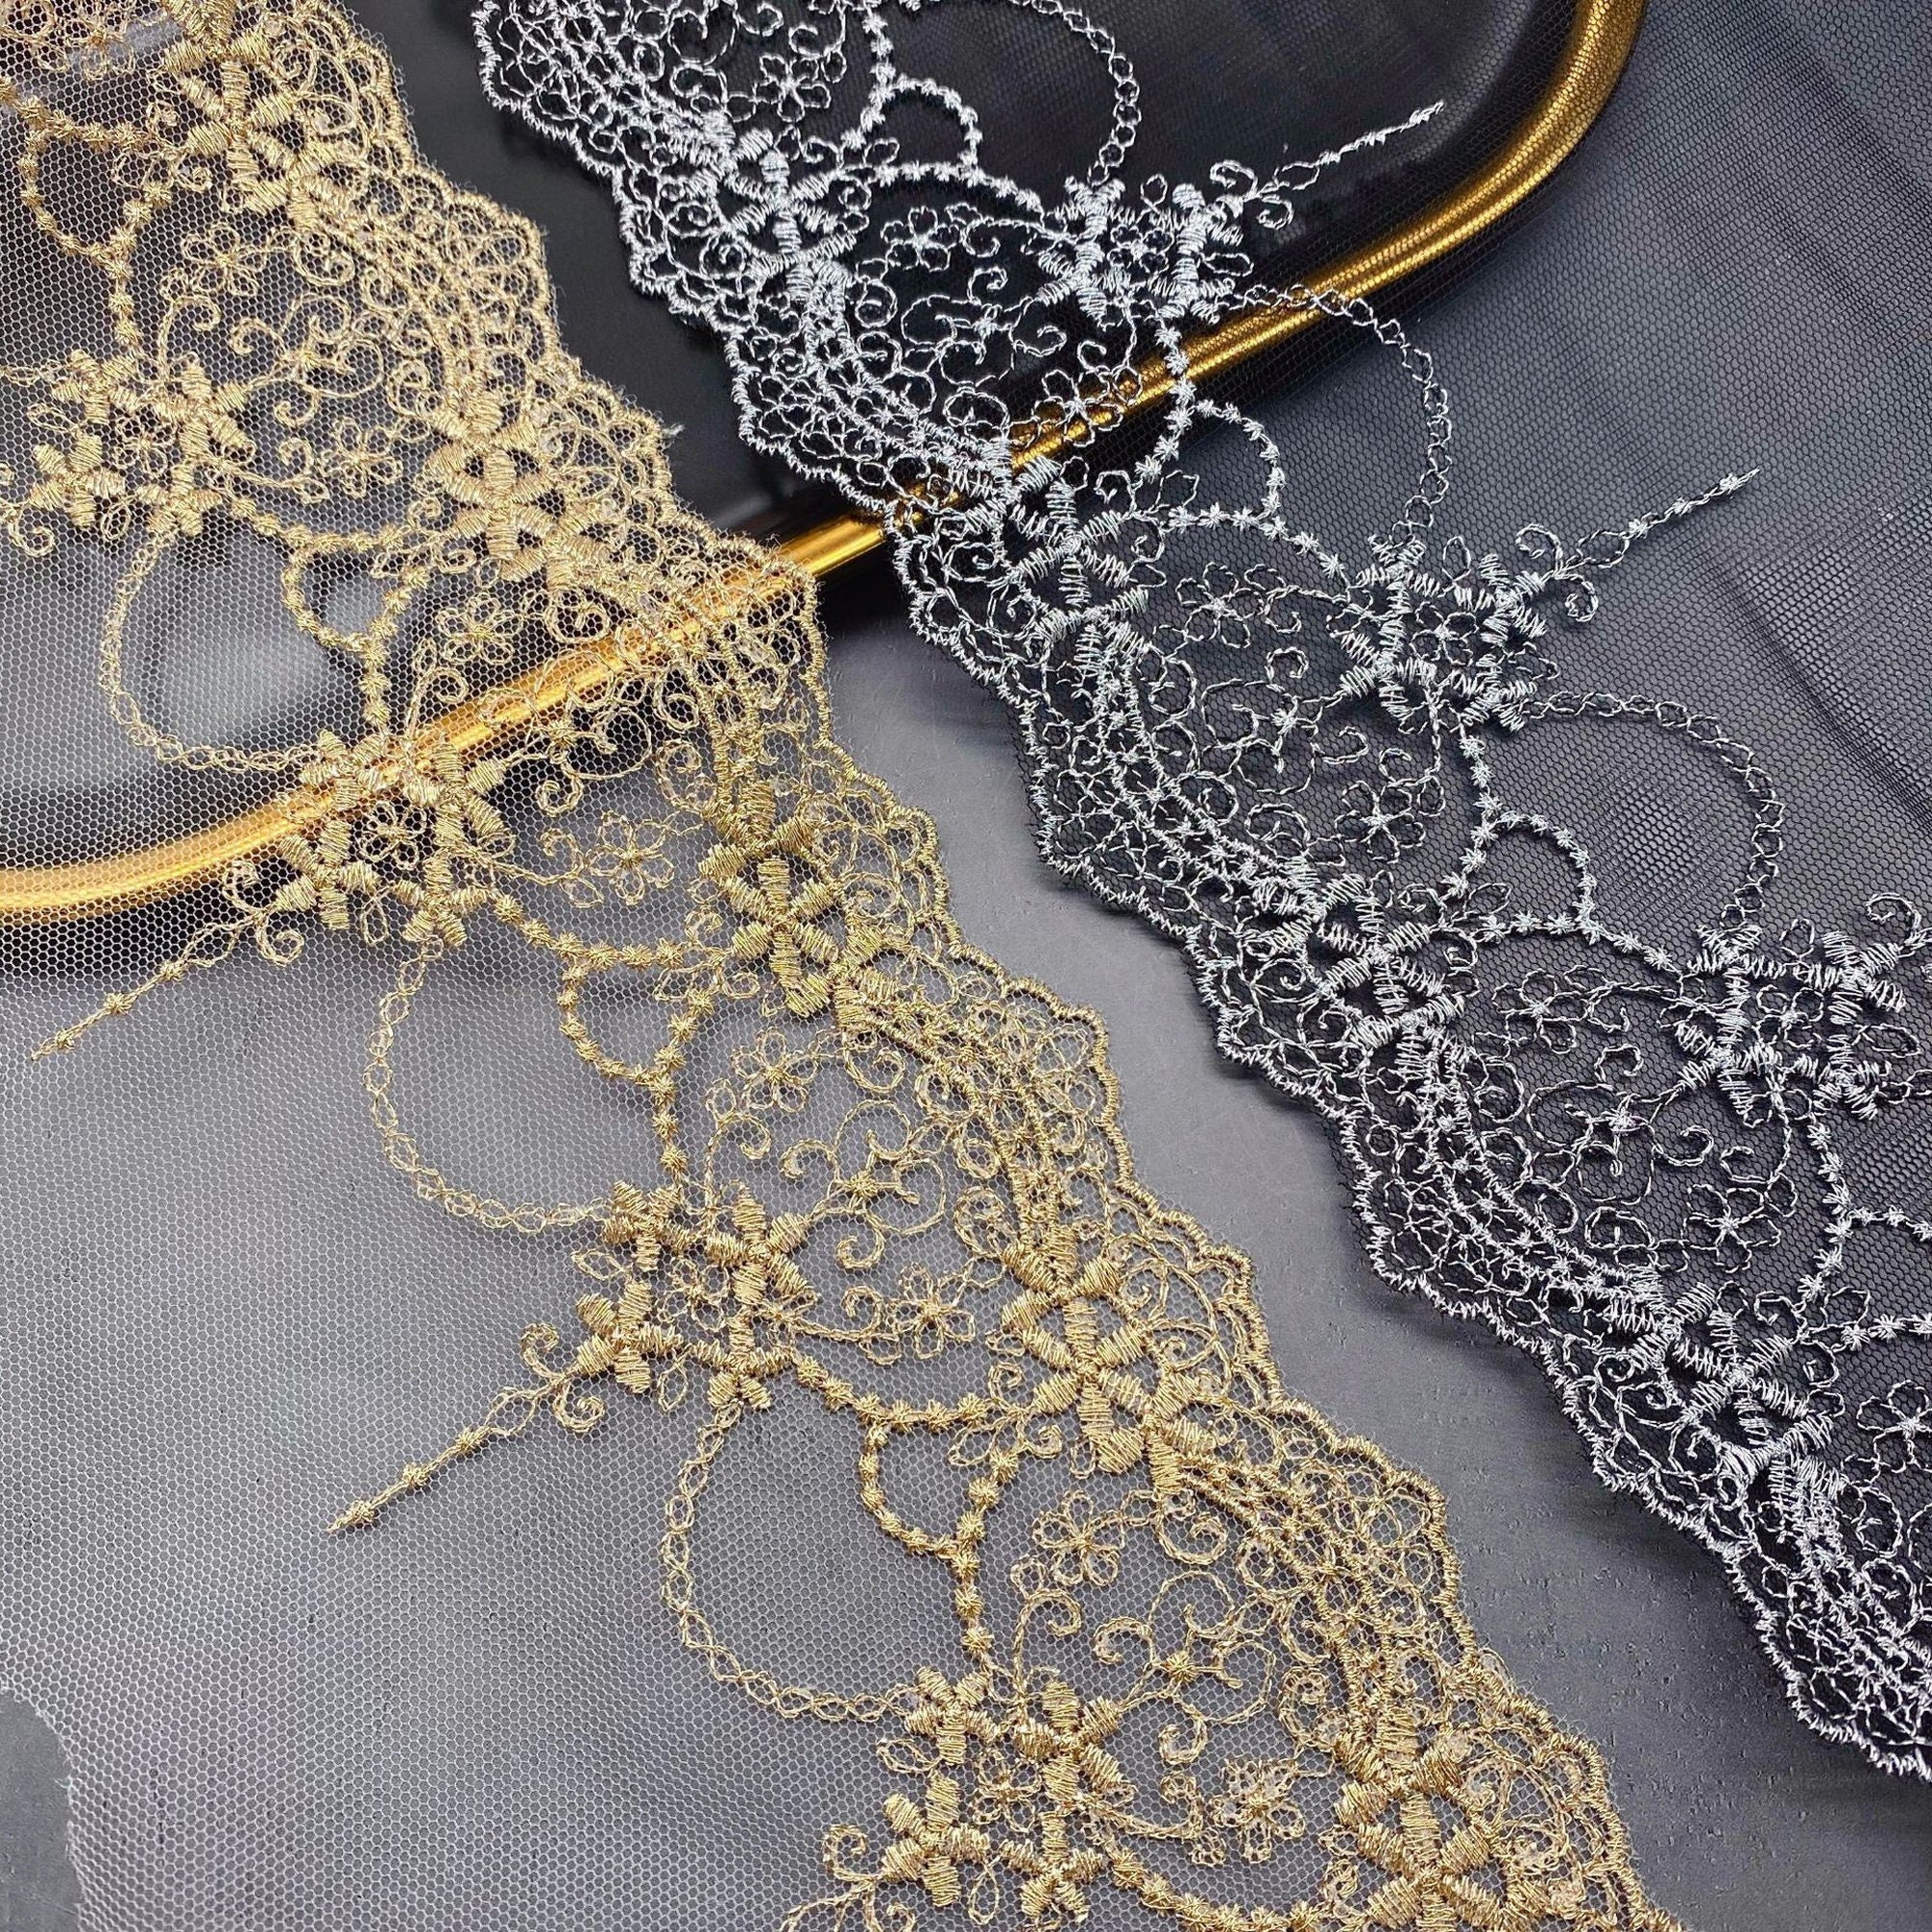 Crochet Gold Lurex Lace Ribbom, Set Lurex Lace Ribbons for Crafts